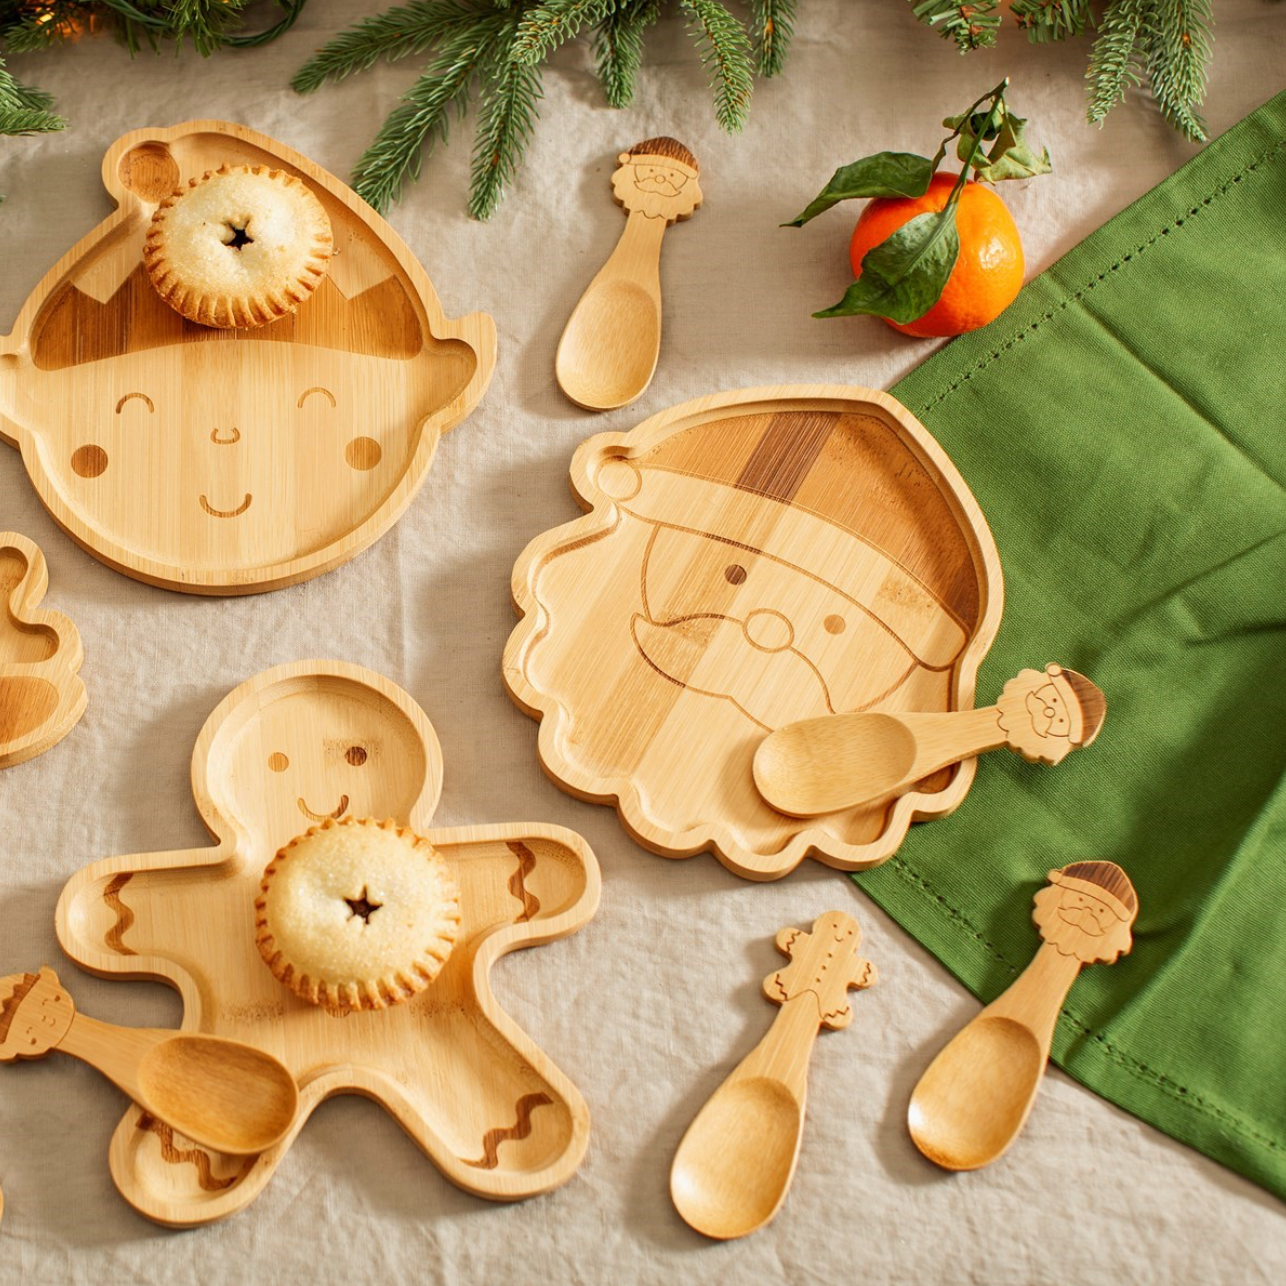 Sass & Belle - Bamboo Christmas Spoons Sets of 3